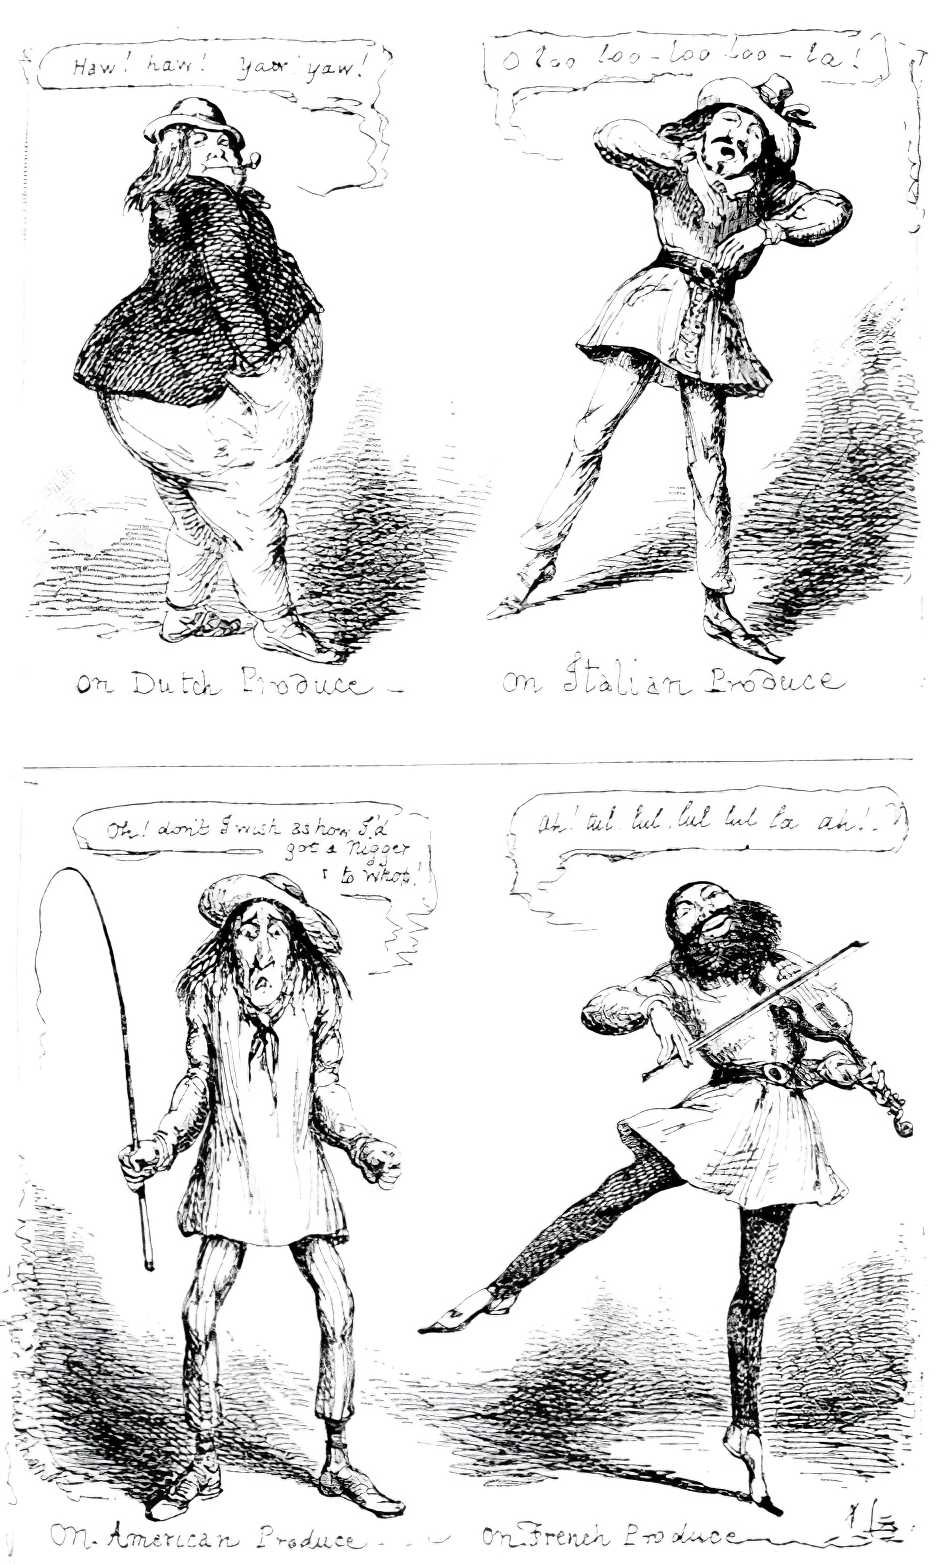 A typical example of Cruikshank's use of caricature and speech bubbles to tell a story through graphics